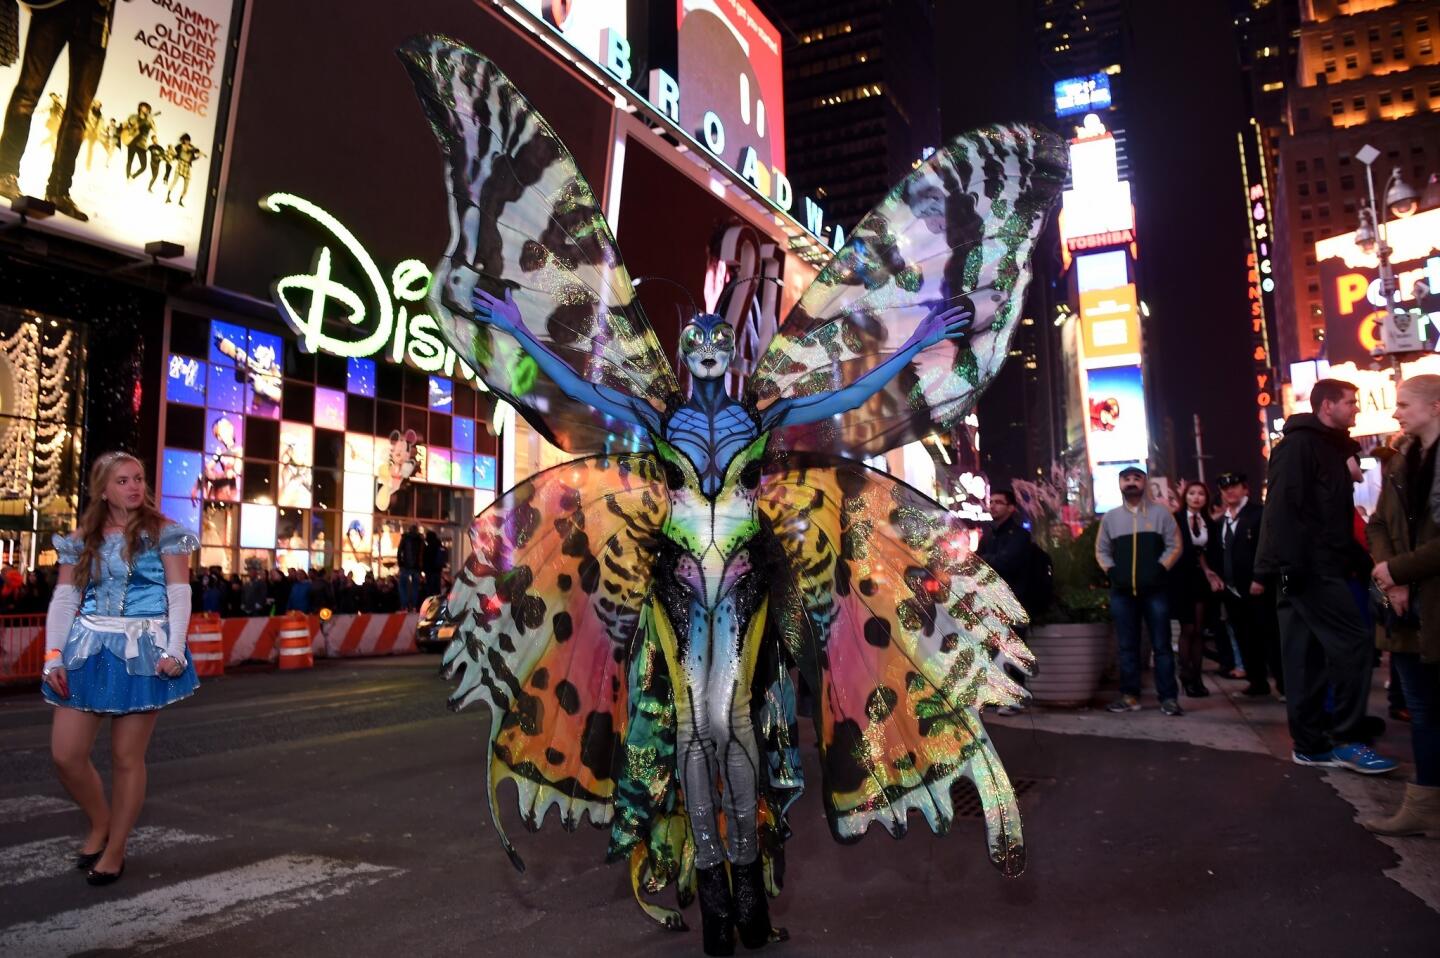 Heidi Klum spreads her wings as a colorful butterfly on Halloween at New York's Time Square.